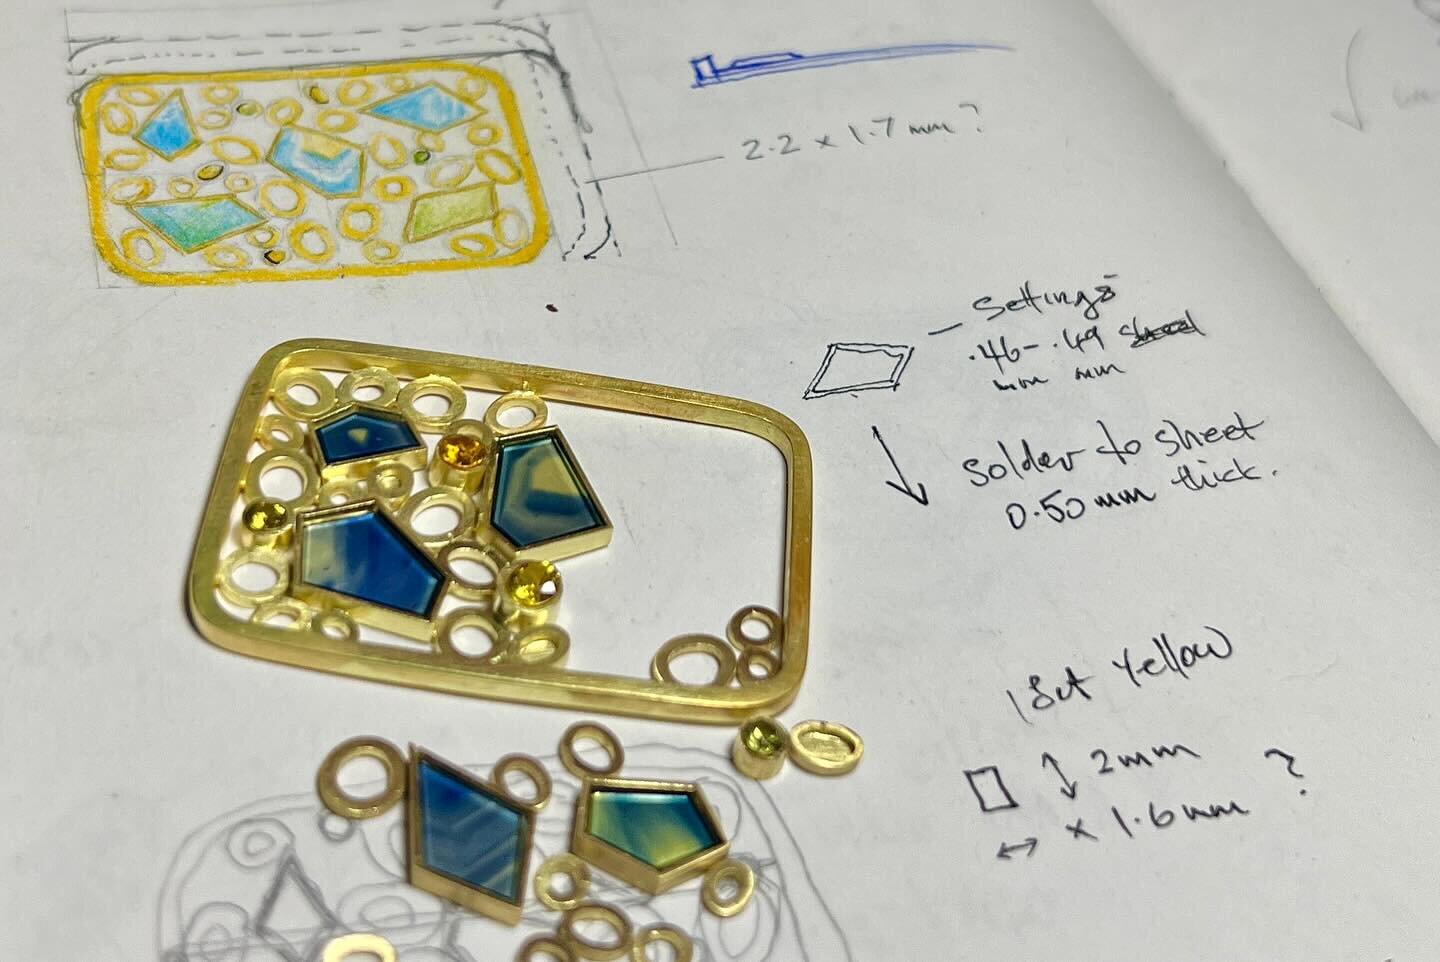 Brooch &ldquo;Box of Treasure&rdquo; recently shown as part of Memories Are Made Of This exhibition @sarahmyerscoughgallery 

These working sketches and ideas are an important part of my design process. Many hours are spent on this before starting to